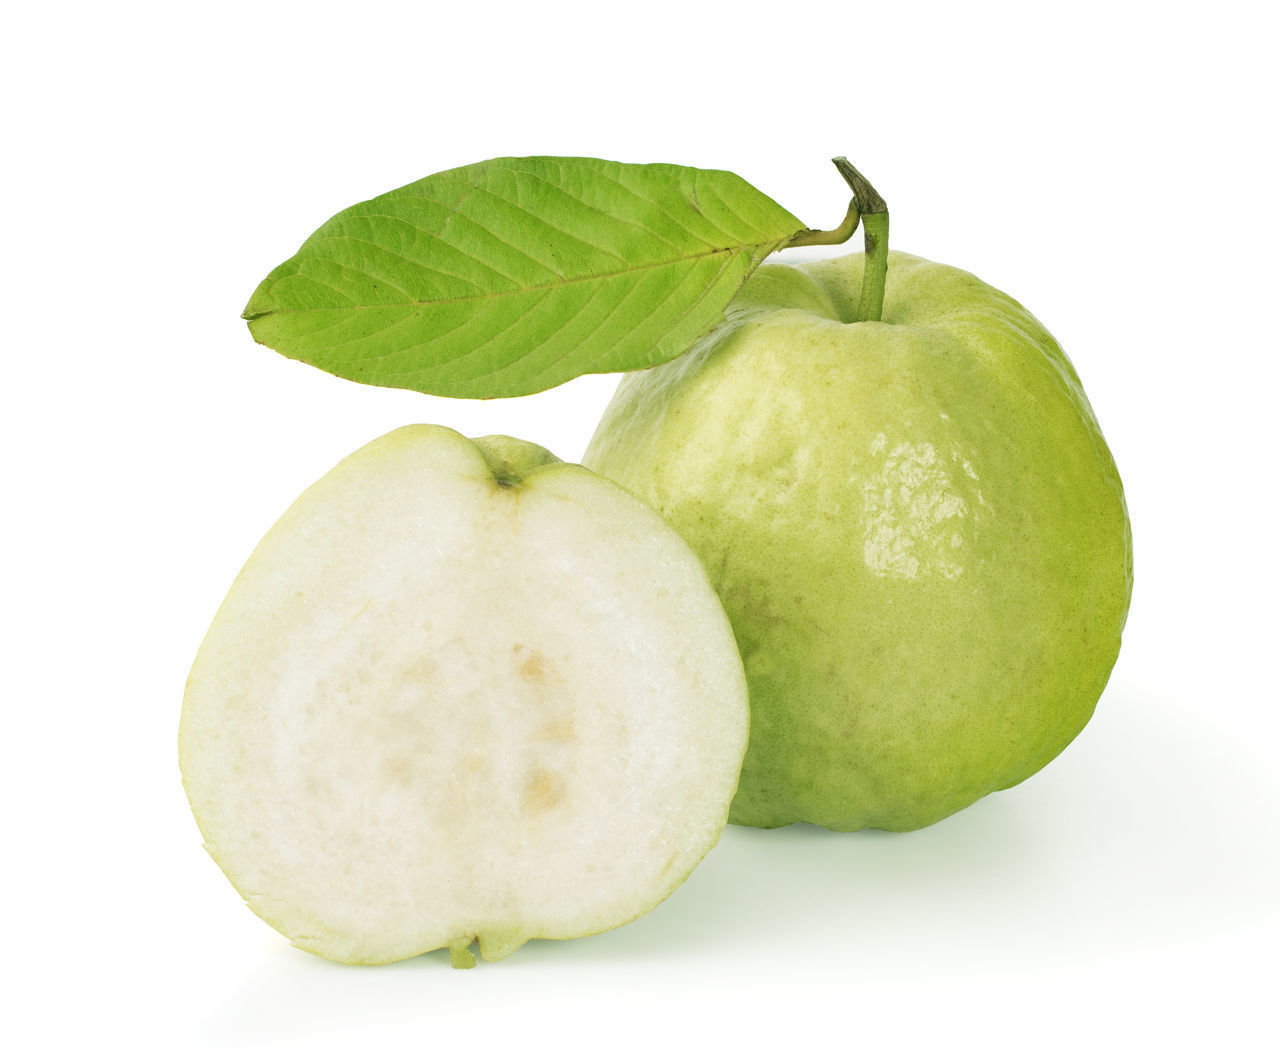 CLOSE-UP OF APPLE ON GREEN BACKGROUND